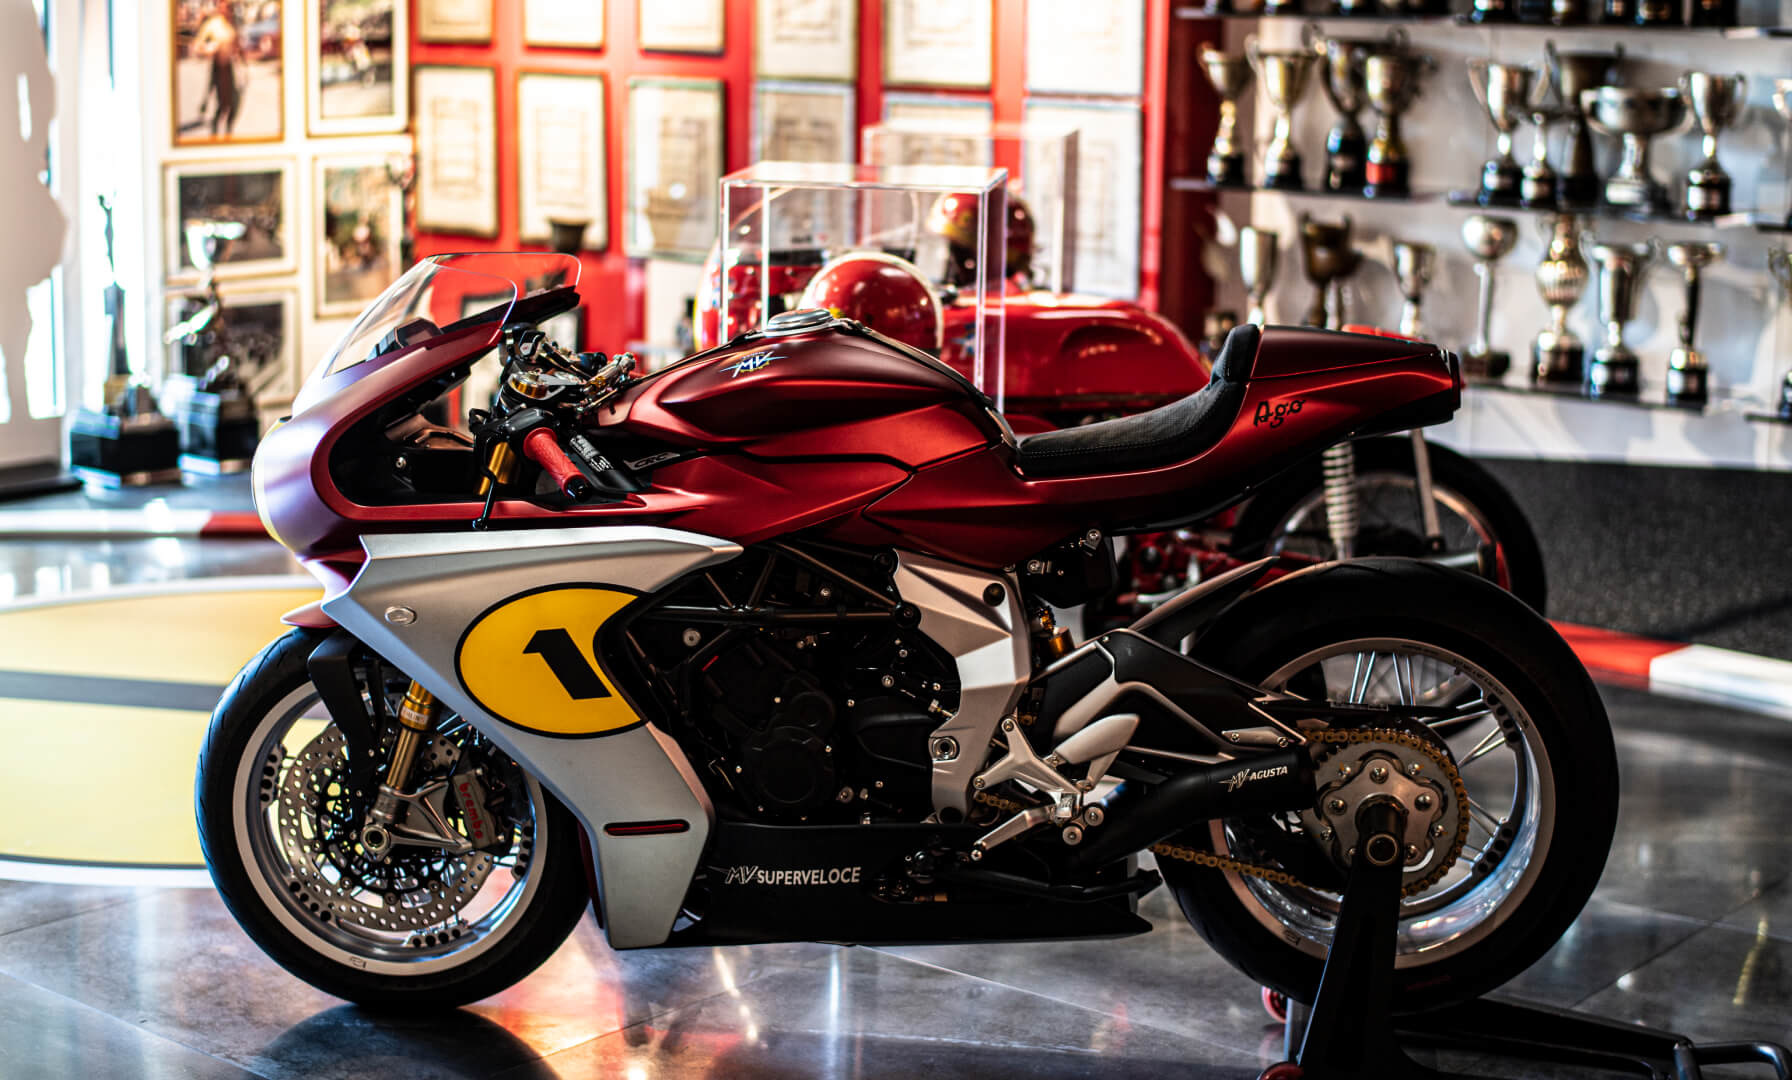 A side view of the new Special Edition Superveloce Ago created in commemoration of Giacomo Agostini